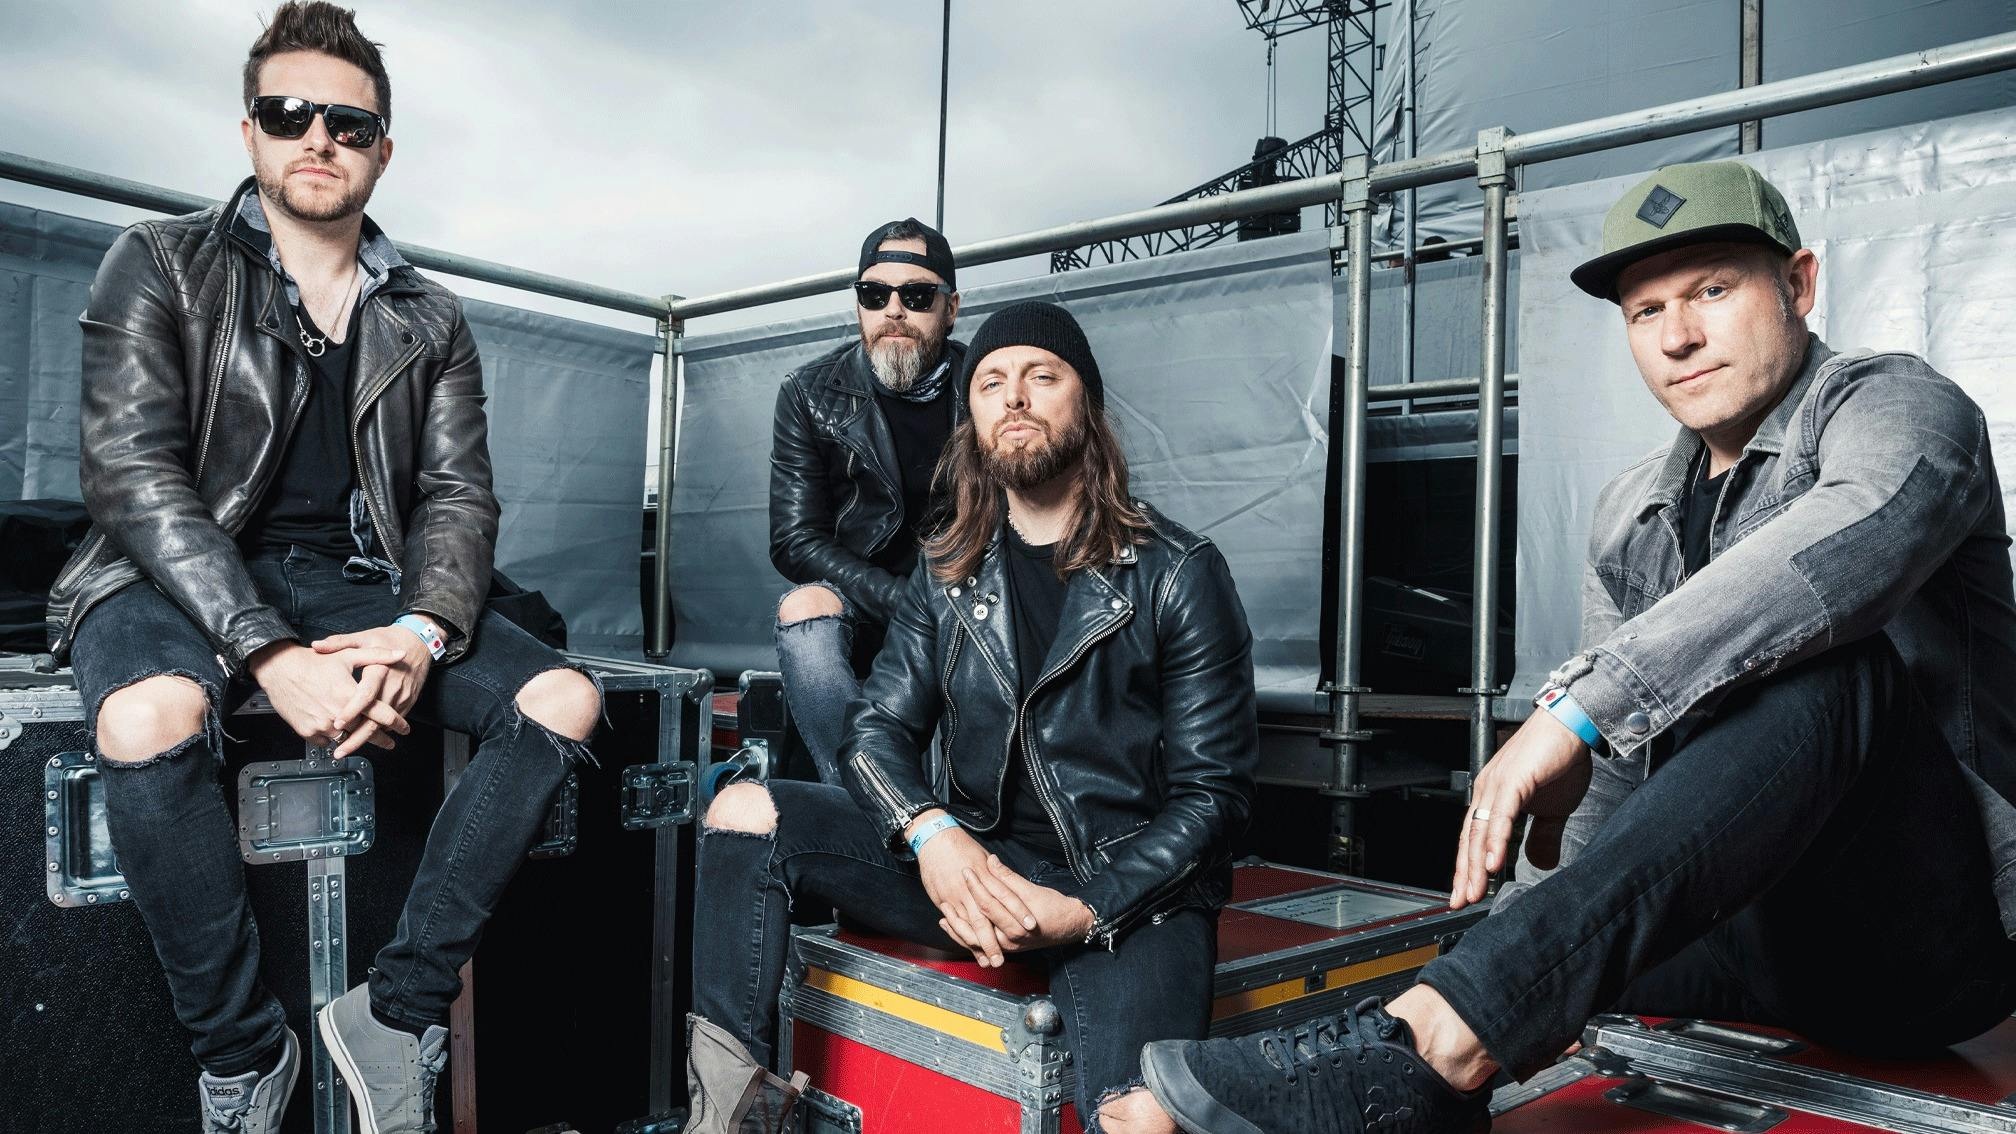 The rise of Bullet For My Valentine, as told through their most important gigs